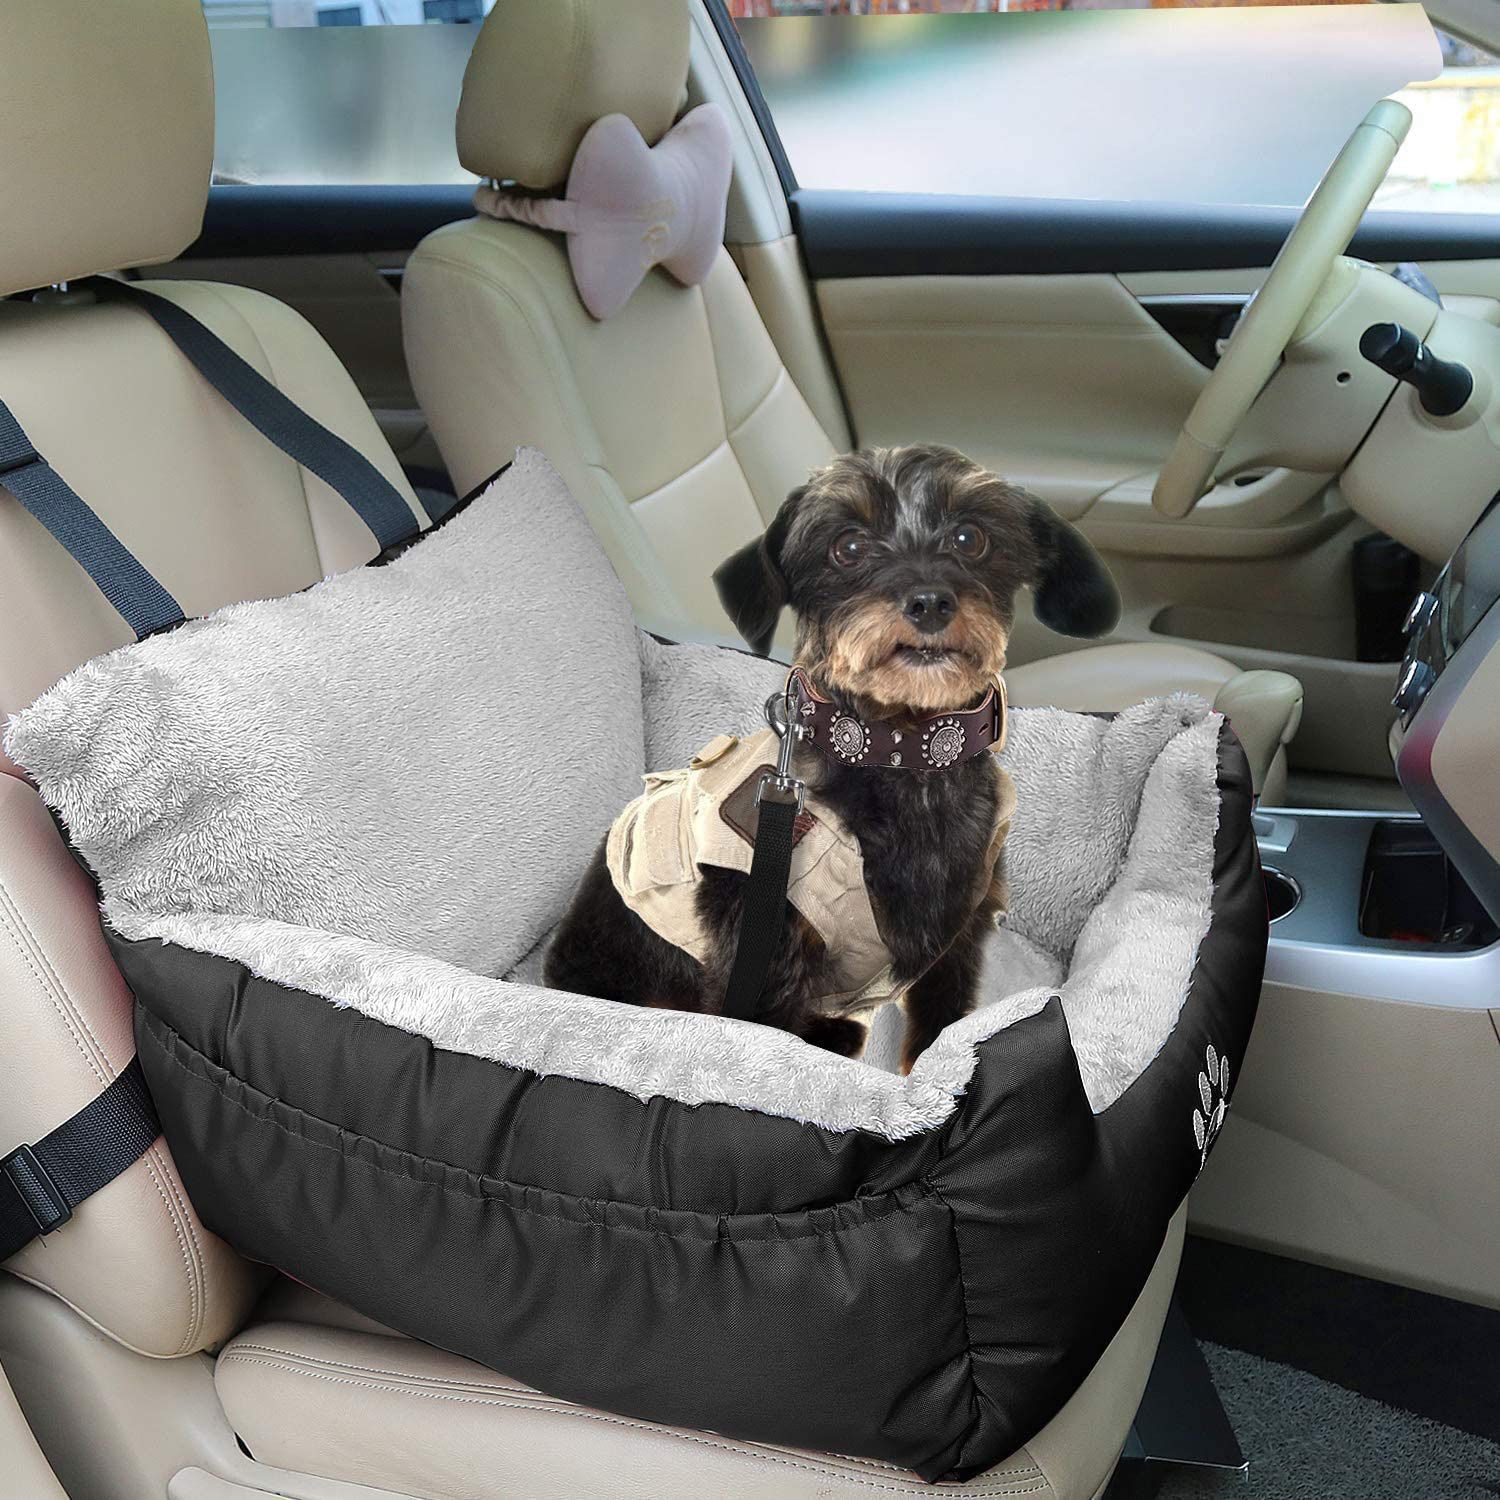 Dog Car Seat,Puppy Booster Seat Dog Travel Car Carrier Bed (Black) 